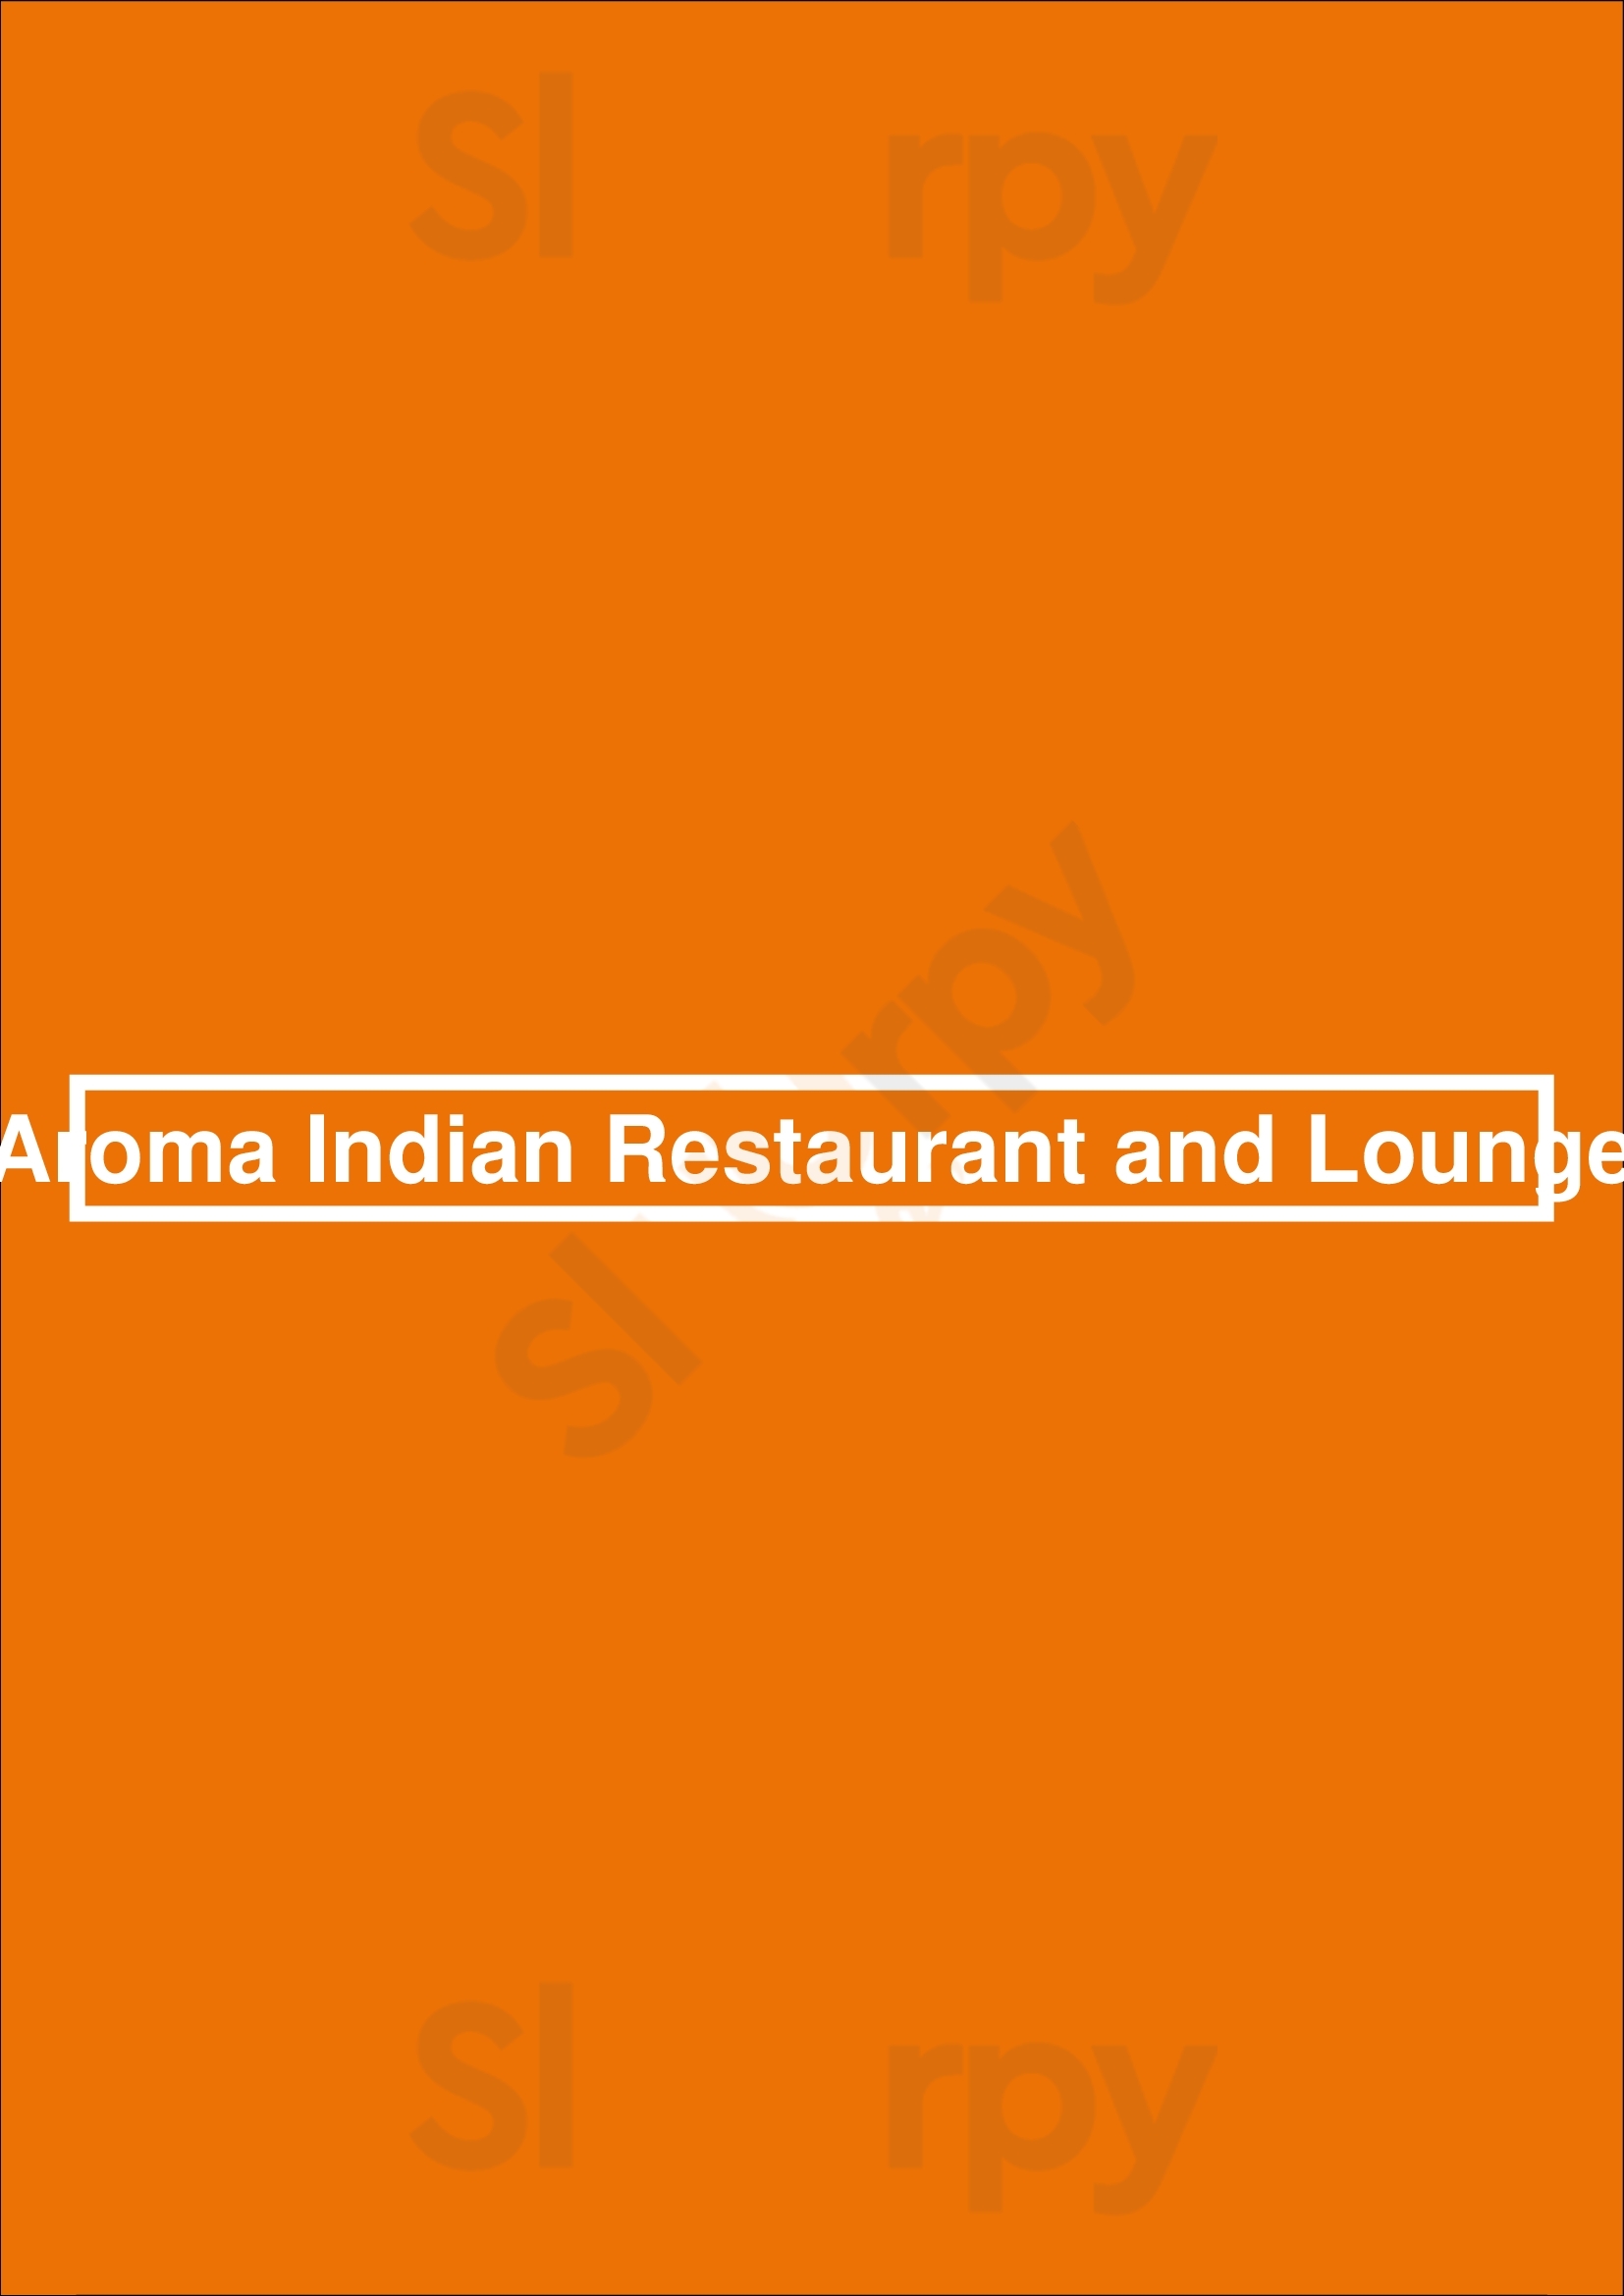 Aroma Indian Restaurant And Lounge Port Moody Menu - 1